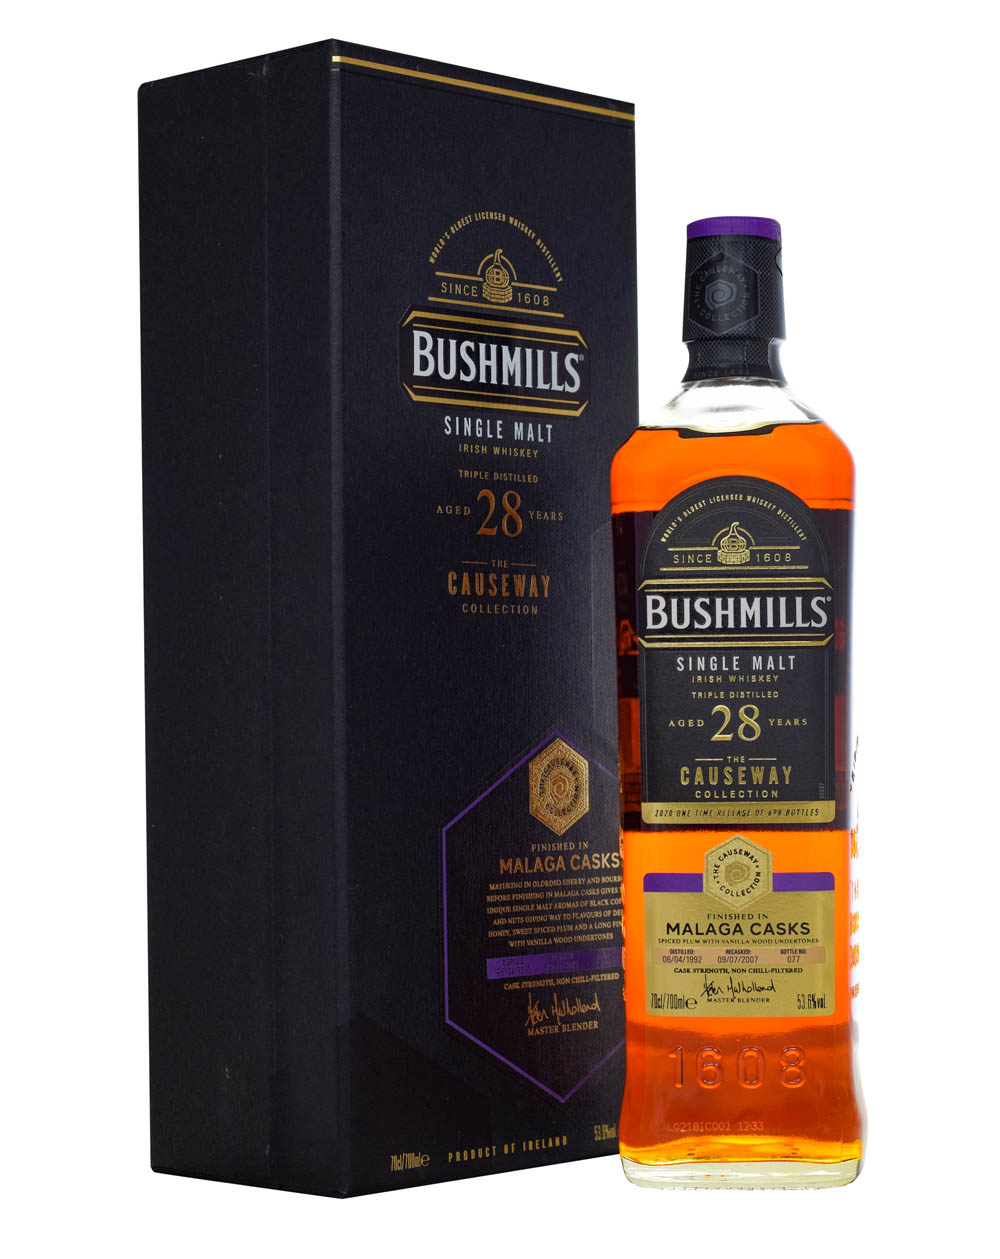 Bushmills 28 Years Old Malaga Casks The Causeway Collection Box Musthave Malts MHM